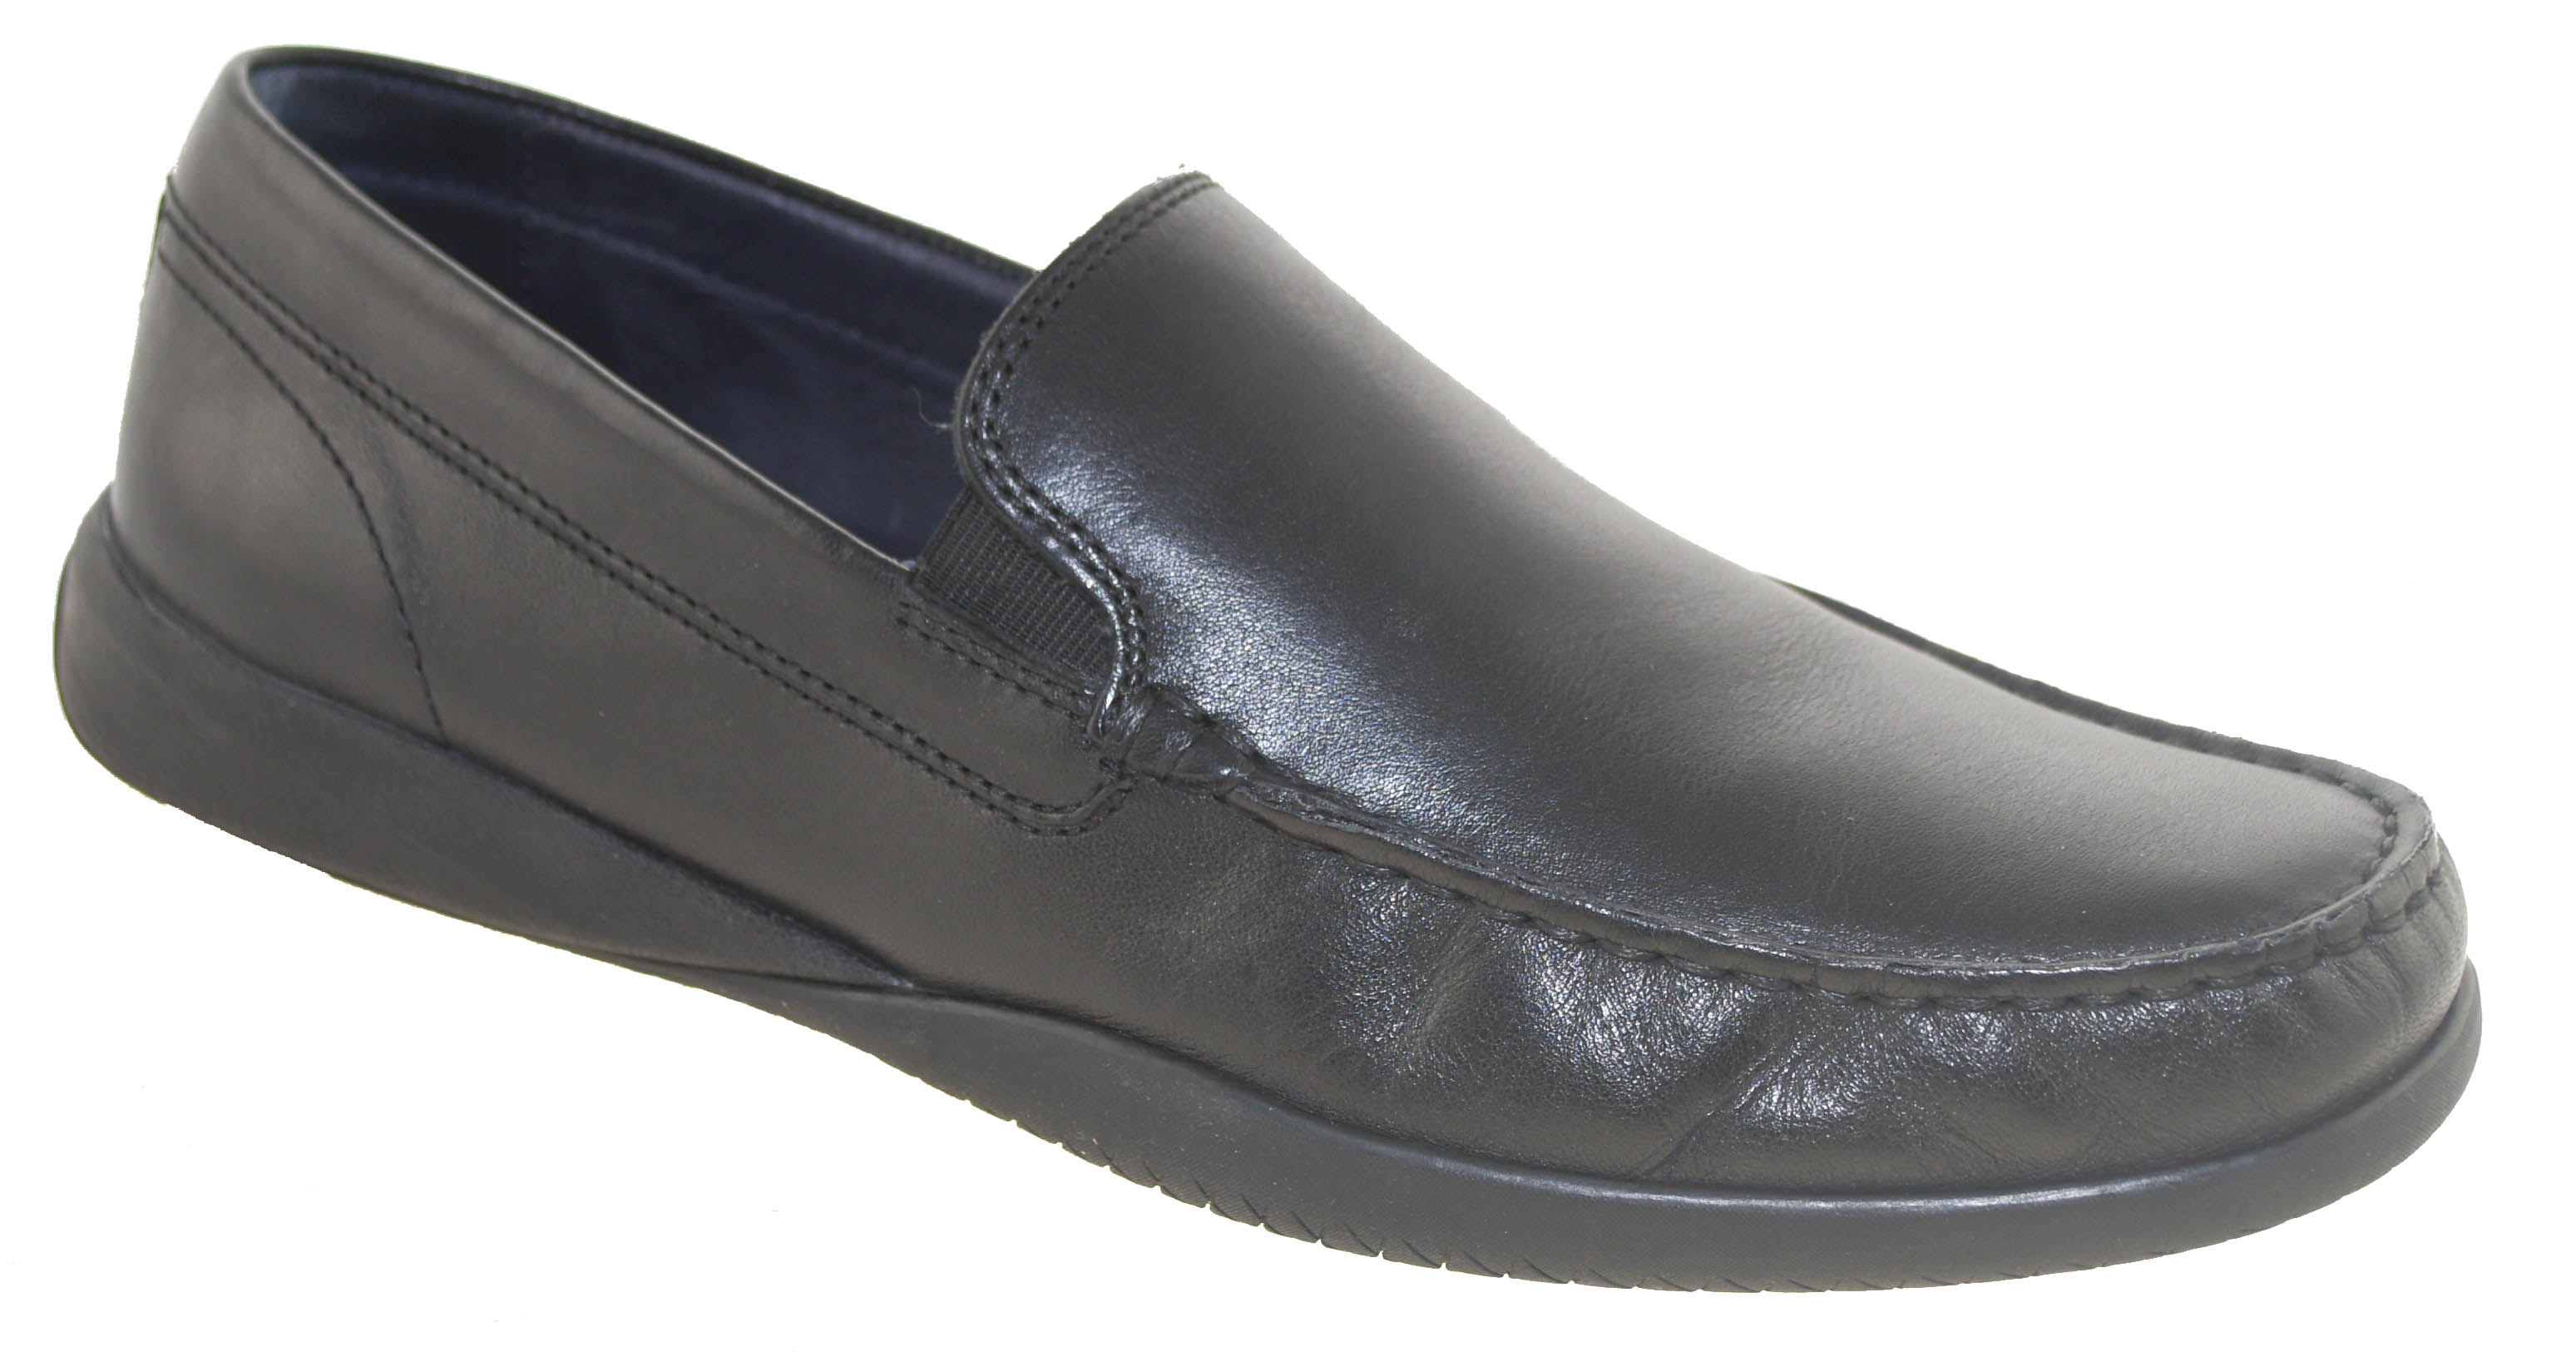 lovell 2 loafer cole haan